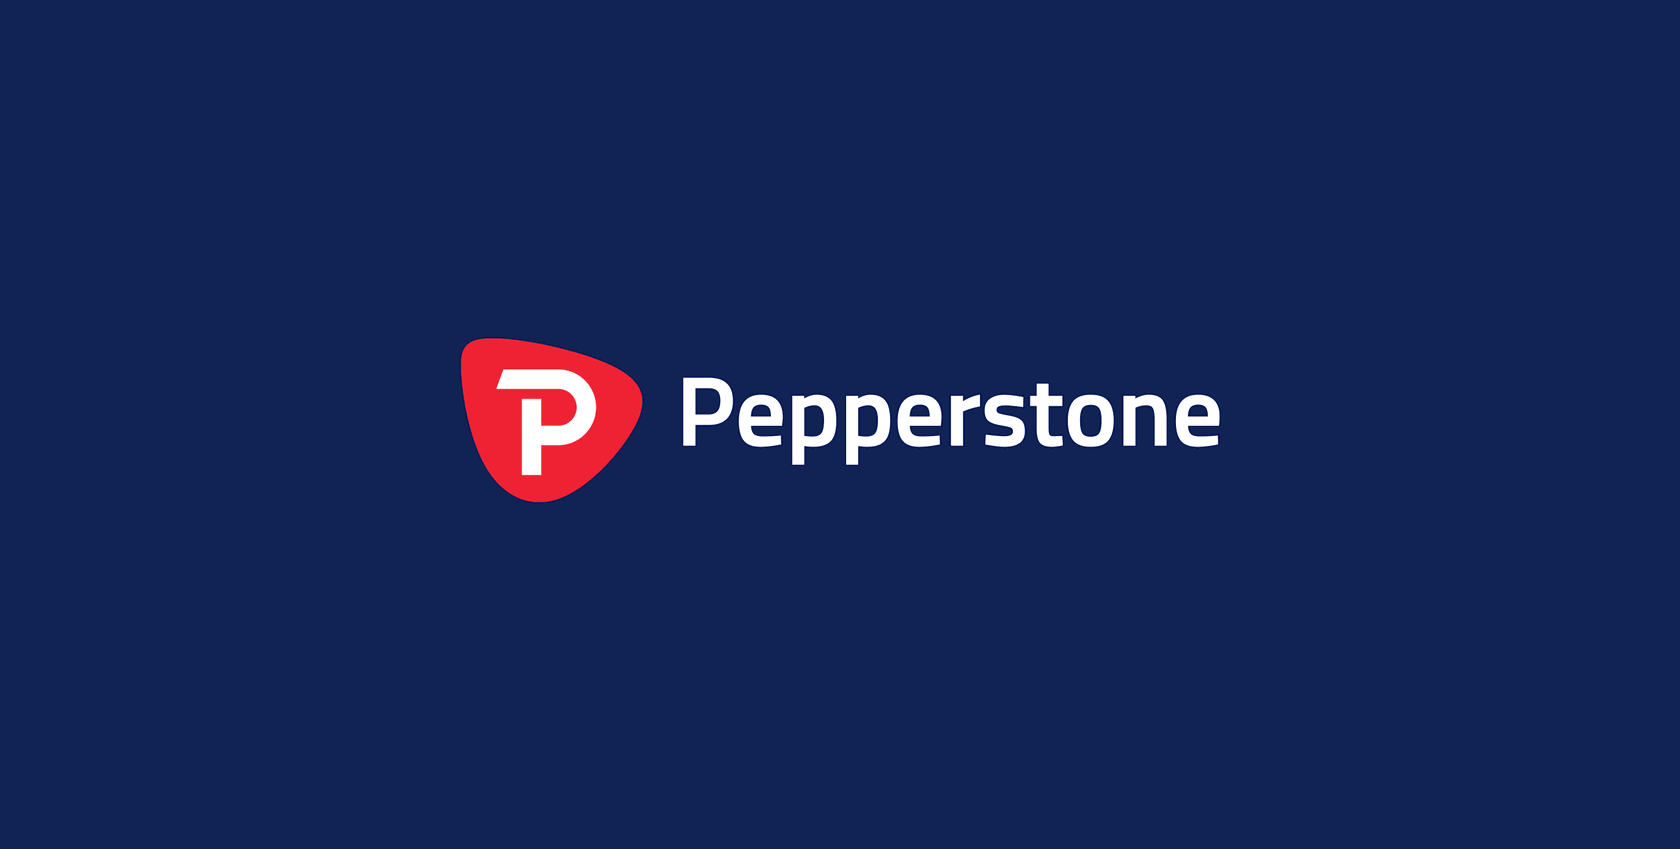 Pepperstone scores huge tennis deal ATP Rankings and ATP Tour